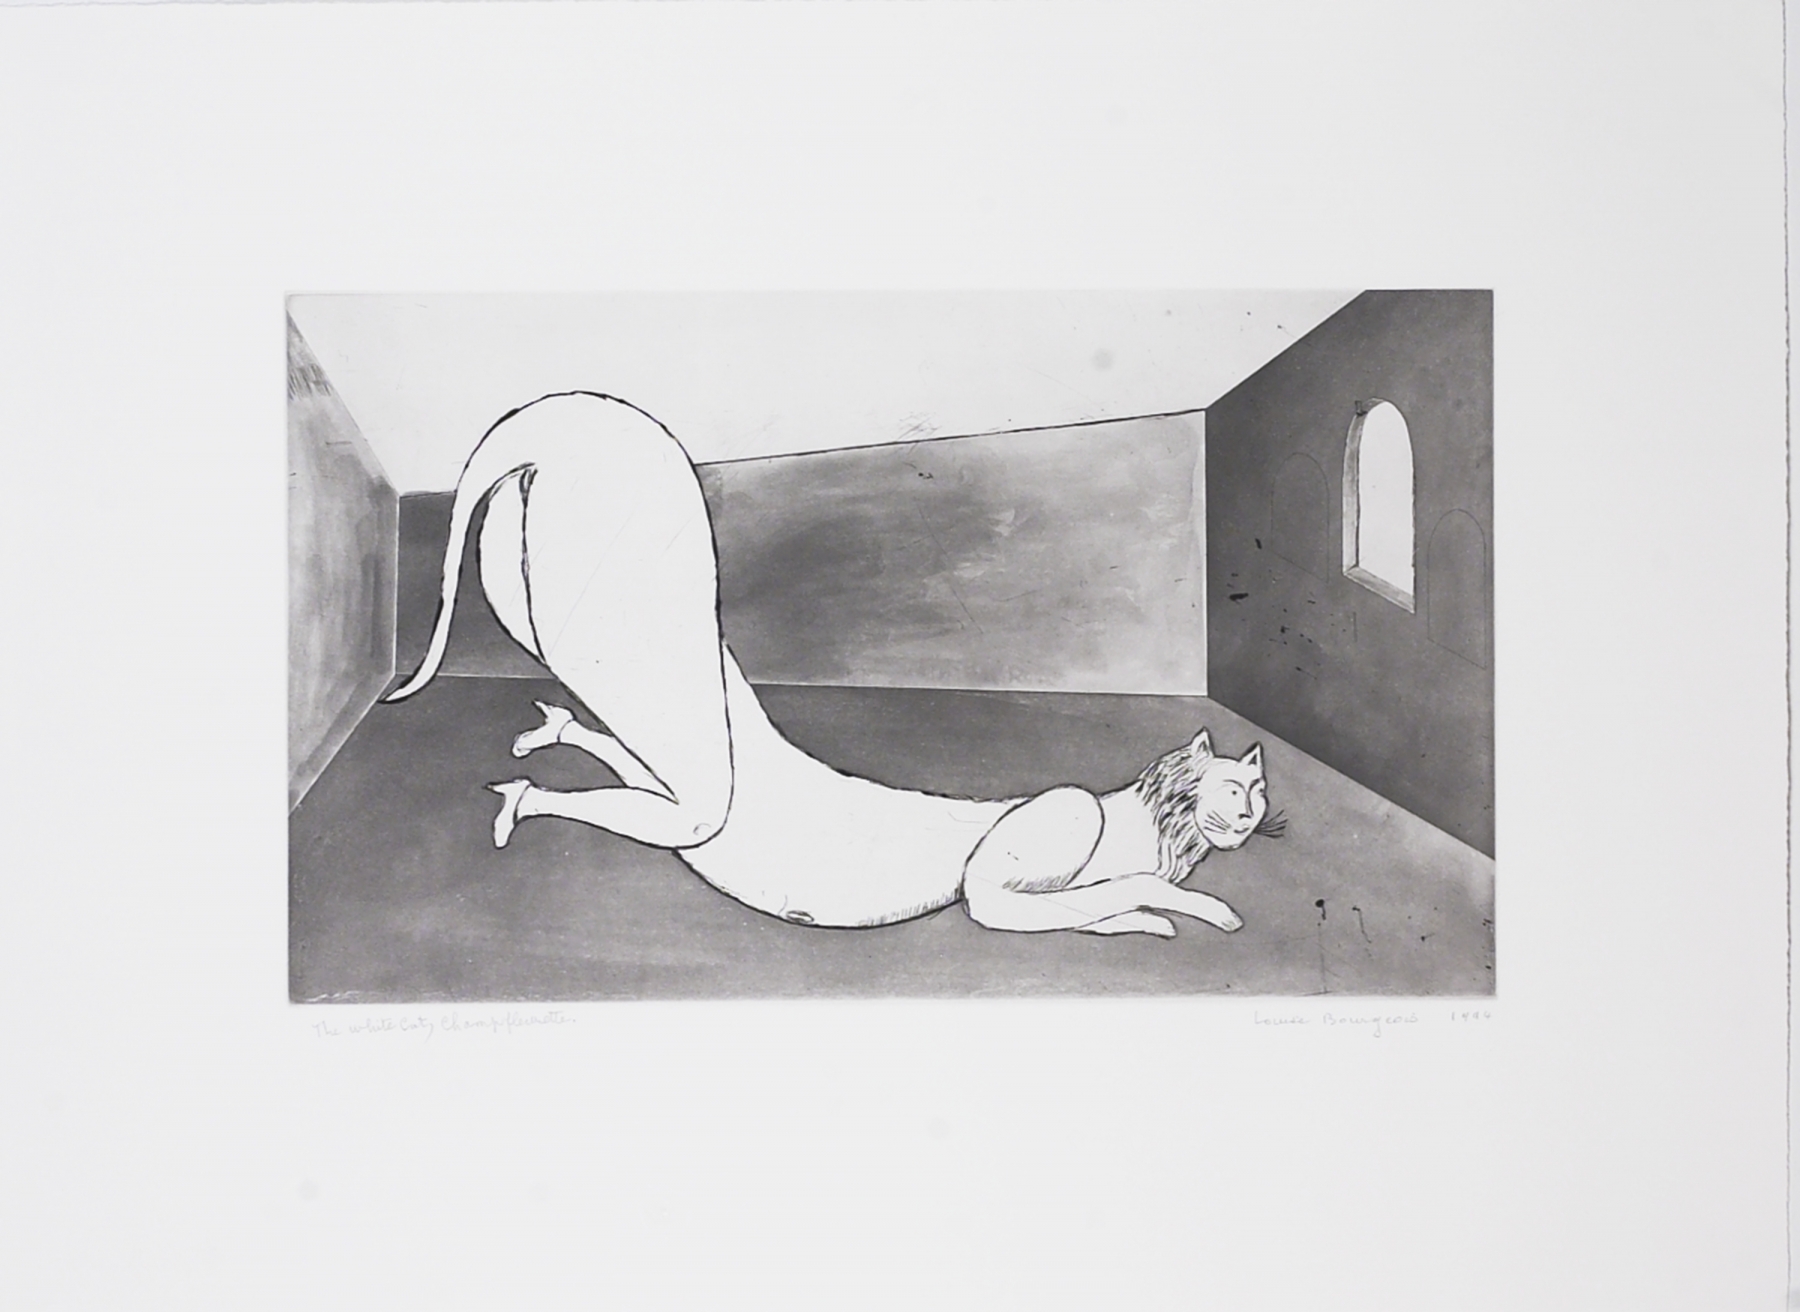 Louise Bourgeois
Champfleurette, the White Cat, 1994
Drypoint, etching, and aquatint
18 1/2 x 25 inches (46.99 x 63.5 cm)
Edition of 22 + proofs

Inquire